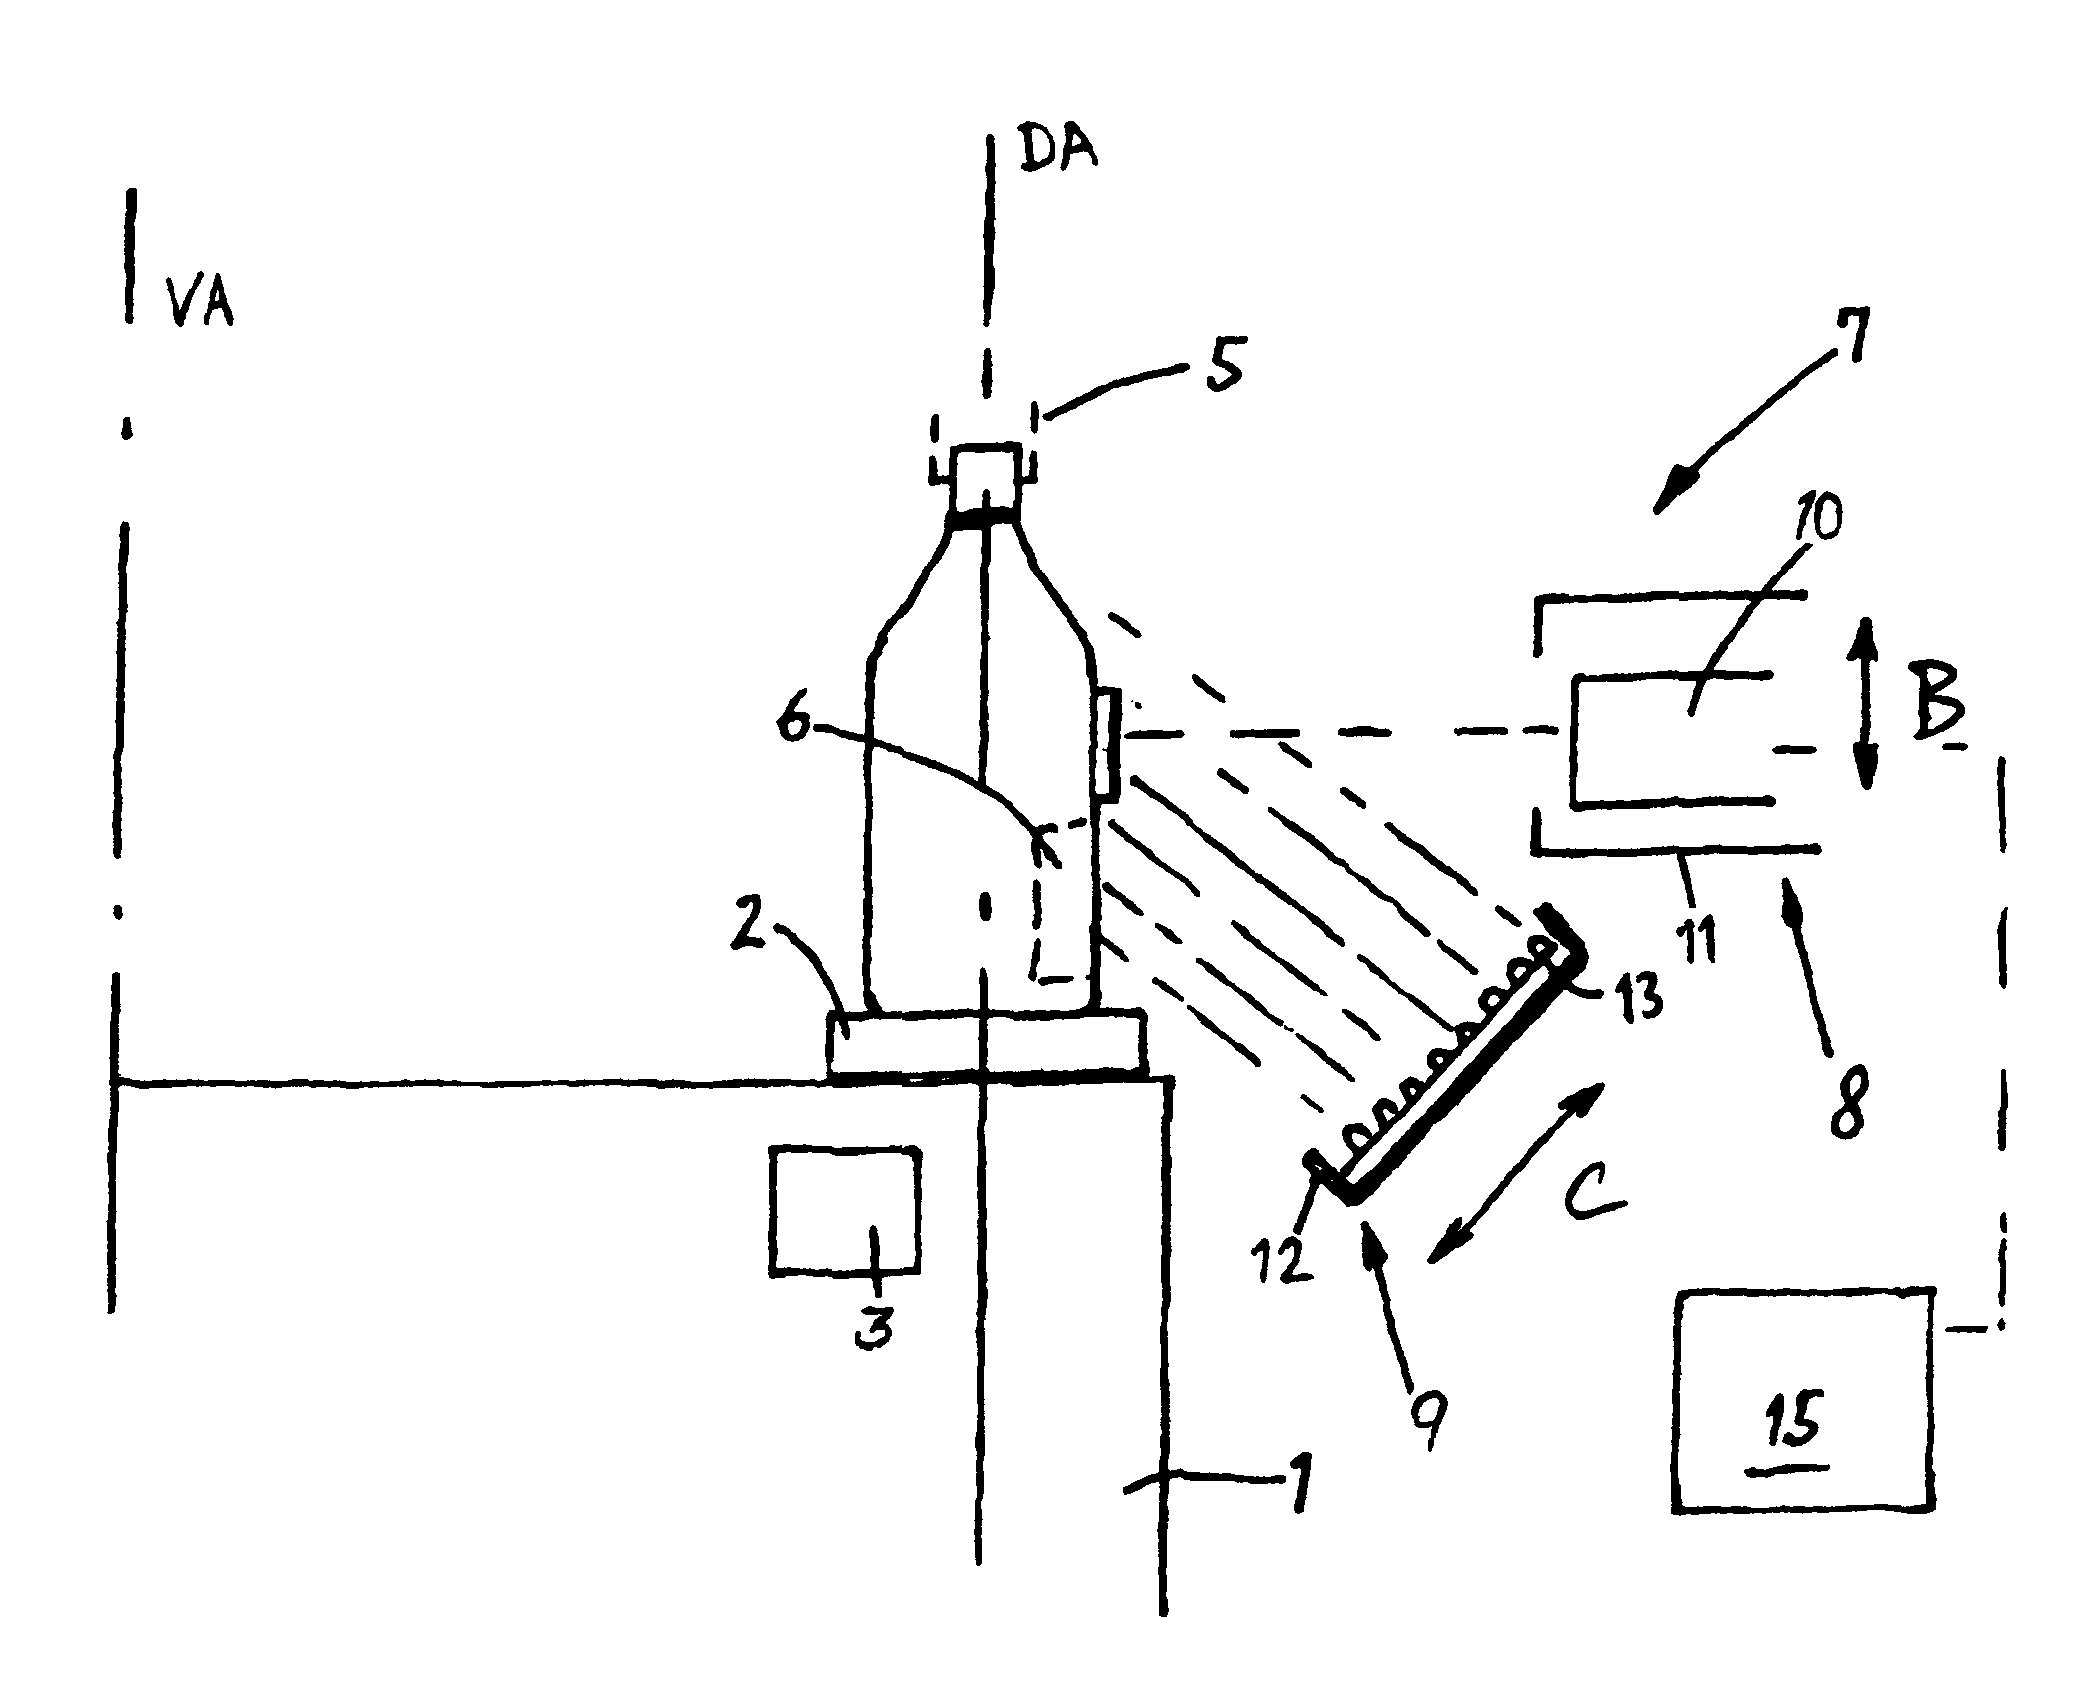 Beverage bottling plant having an apparatus for inspecting bottles or similar containers with an optoelectric detection system and an optoelectric detection system